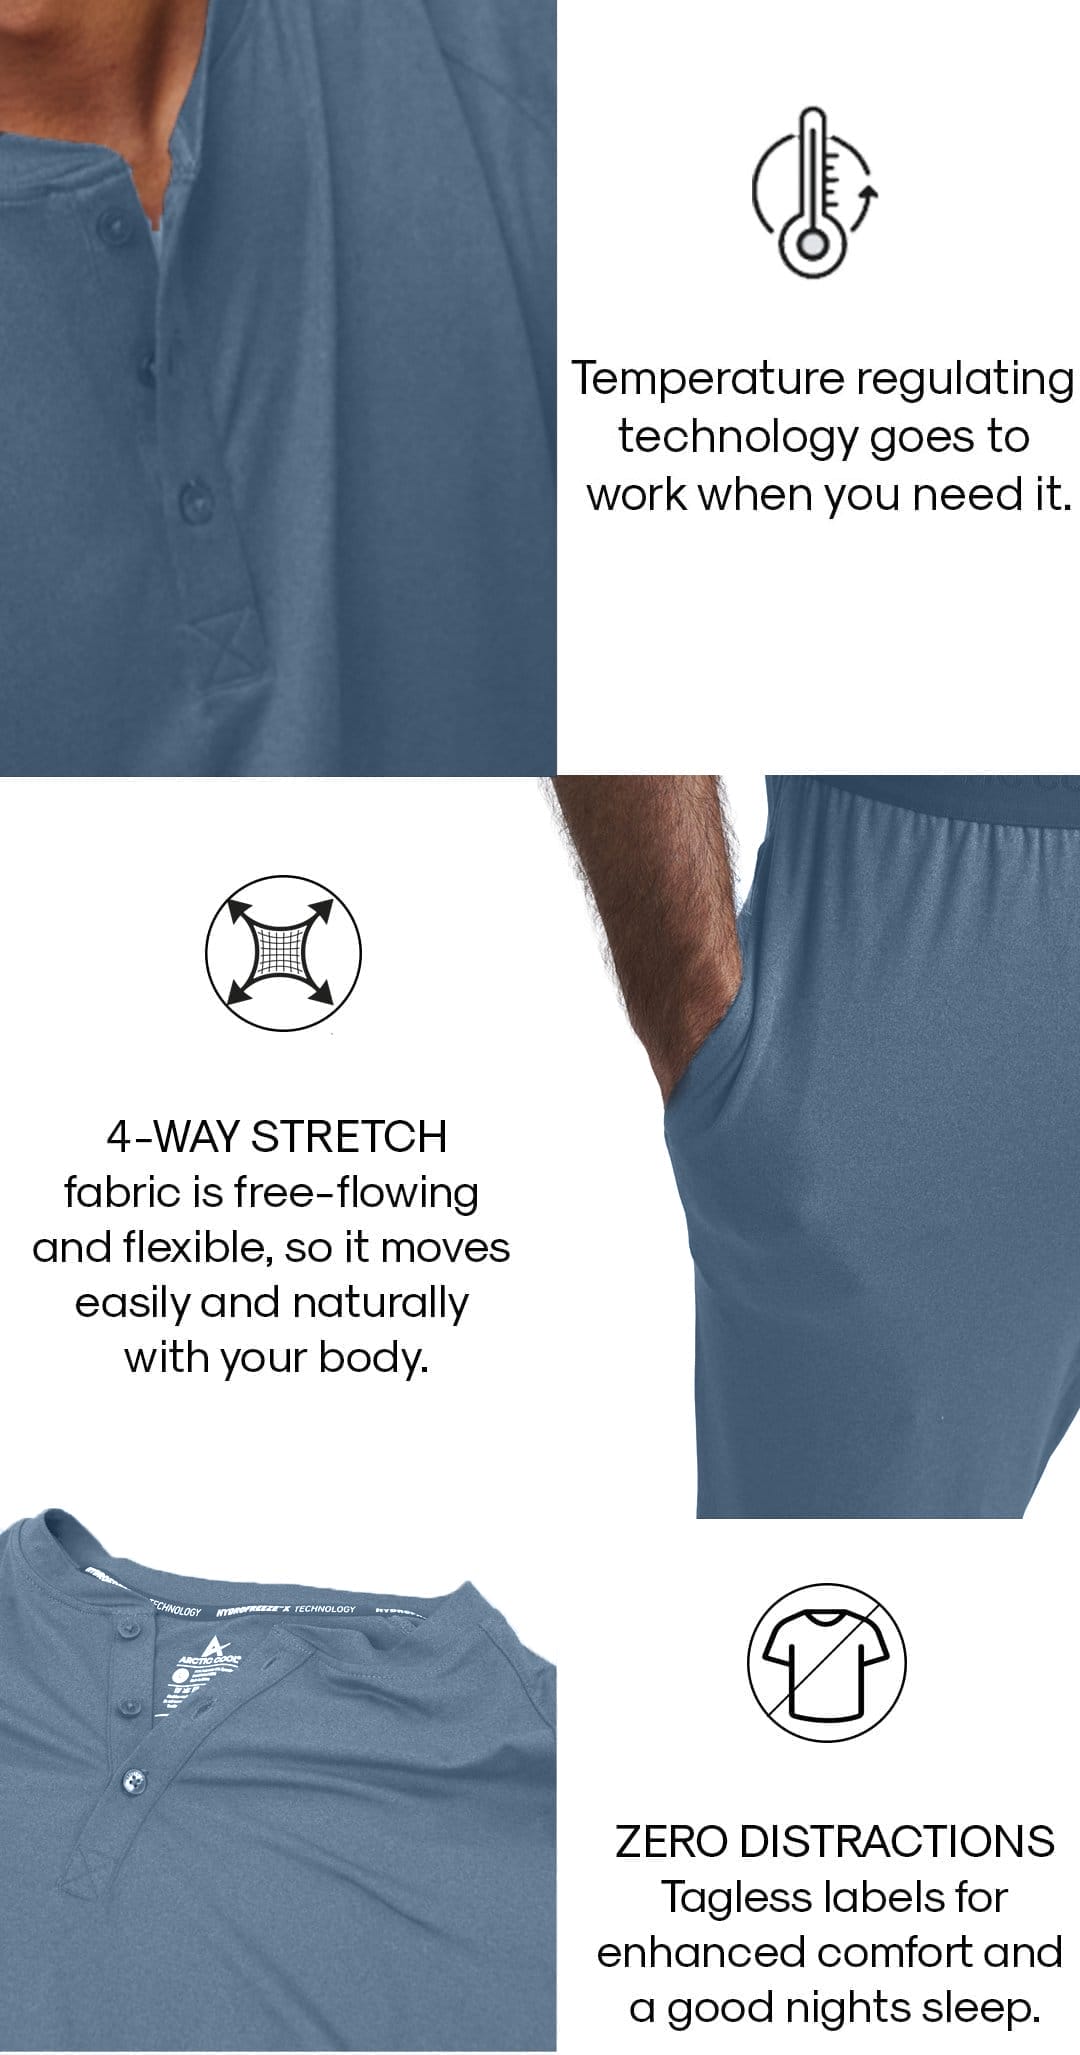 Temperature regulating technology goes to work when you need it. 4-Way stretch fabric is free-flowing and flexible, so it moves easily and naturally with your body. ZERO DISTRACTIONS Tagless labels for enhanced comfort and a good nights sleep.